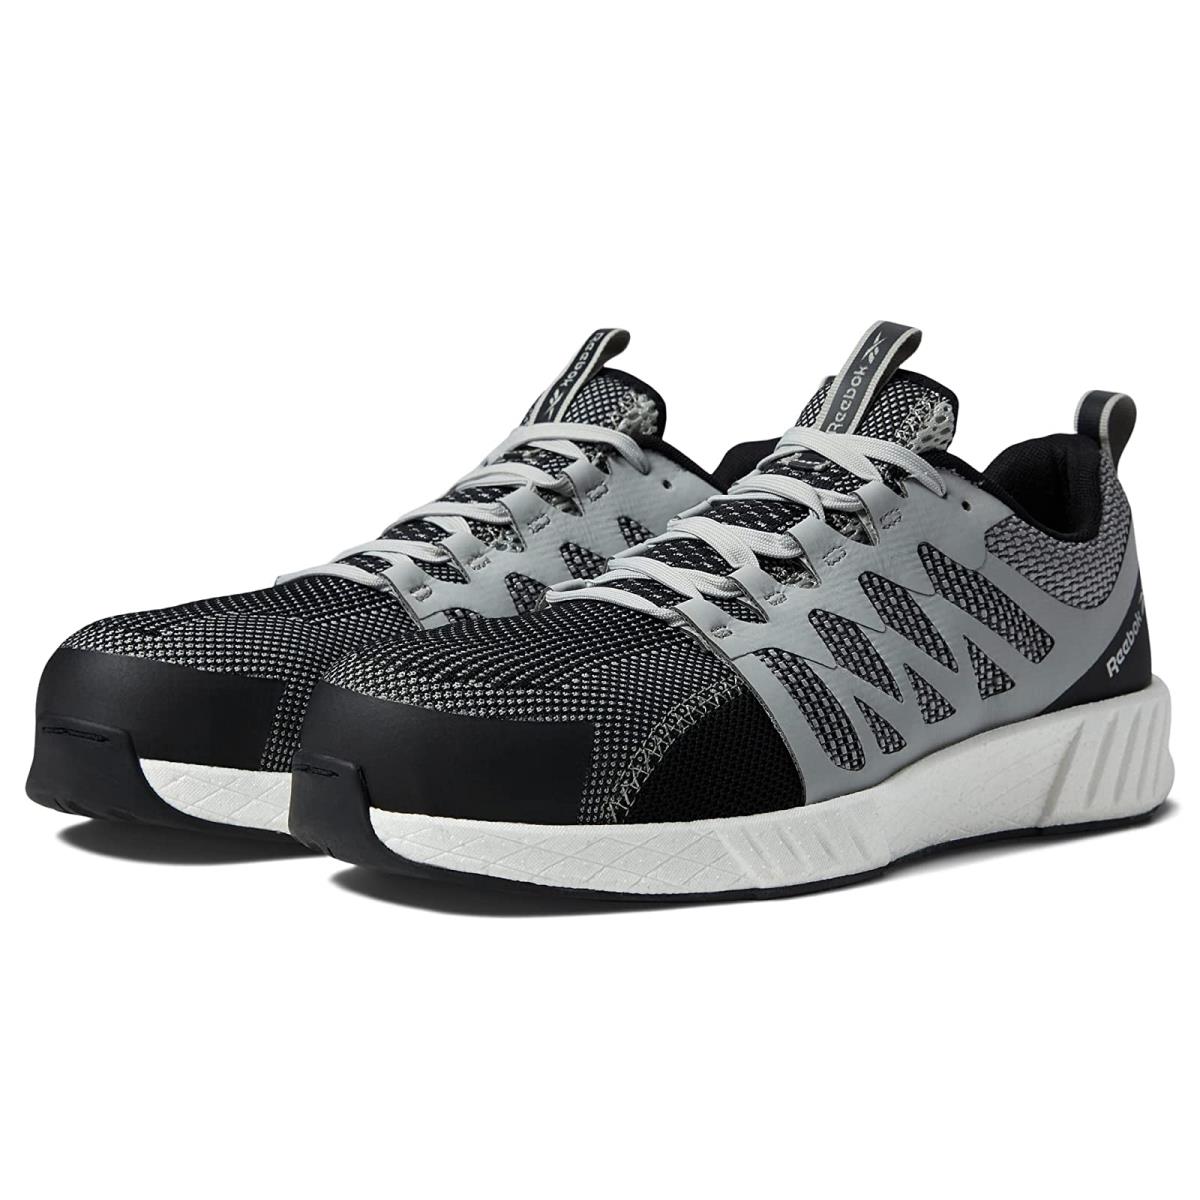 Man`s Shoes Reebok Work Fusion Flexweave Cage Composite Toe Gray